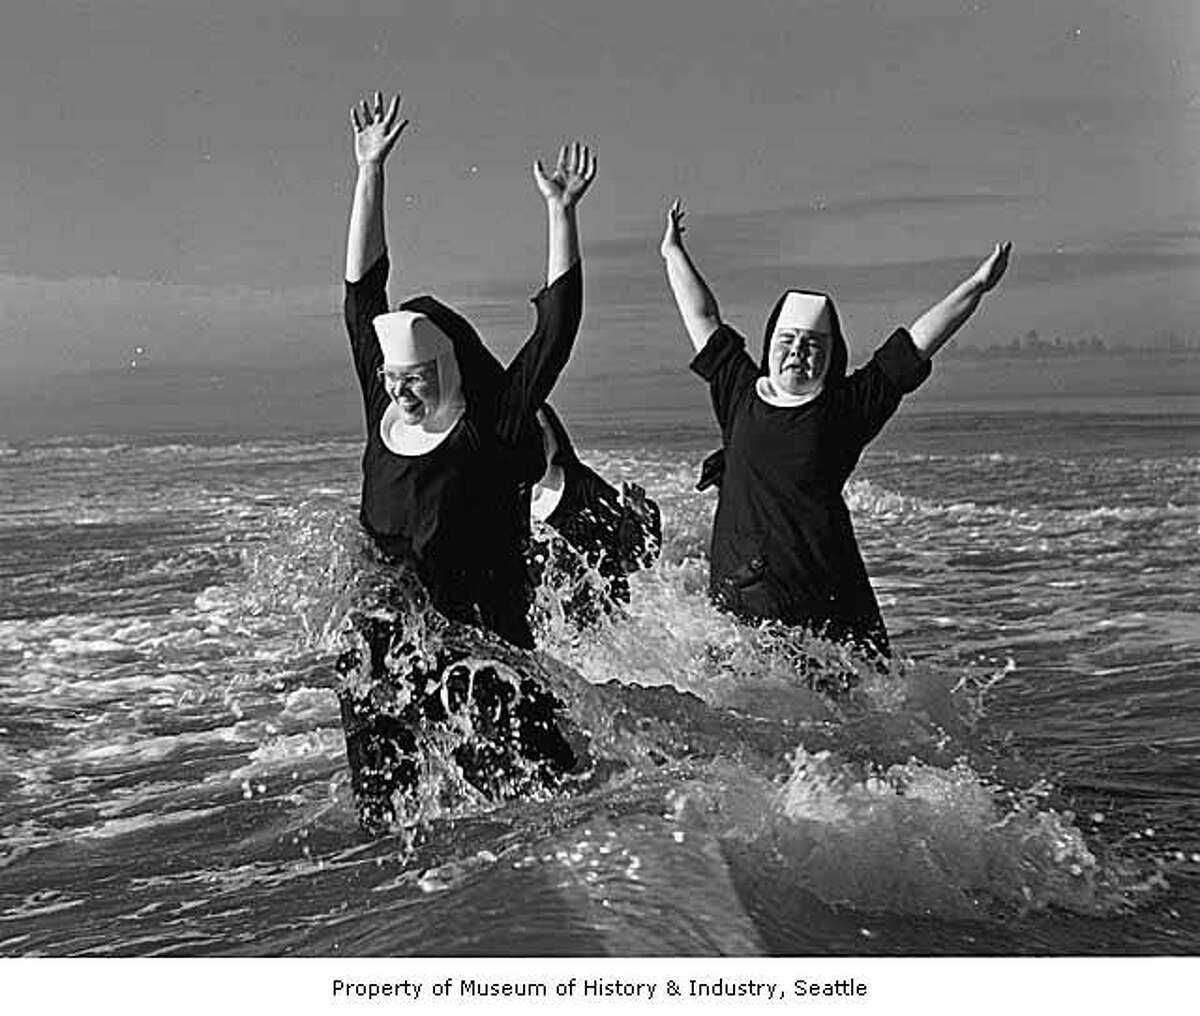 "A group of nuns from the Order of Saint Benedict enjoyed their summer vacation at the beach in Grayland. Here Sisters Ruth (left) and Agnes play in the surf; partly hidden is Sister Rita. After a weeklong break they returned "refreshed and strengthened" to their routine duties of teaching school in the Seattle and Tacoma area." -MOHAI. Photo, dated Aug. 21, 1960, courtesy MOHAI, Seattle P-I Collection, image number 1986.5.6047.